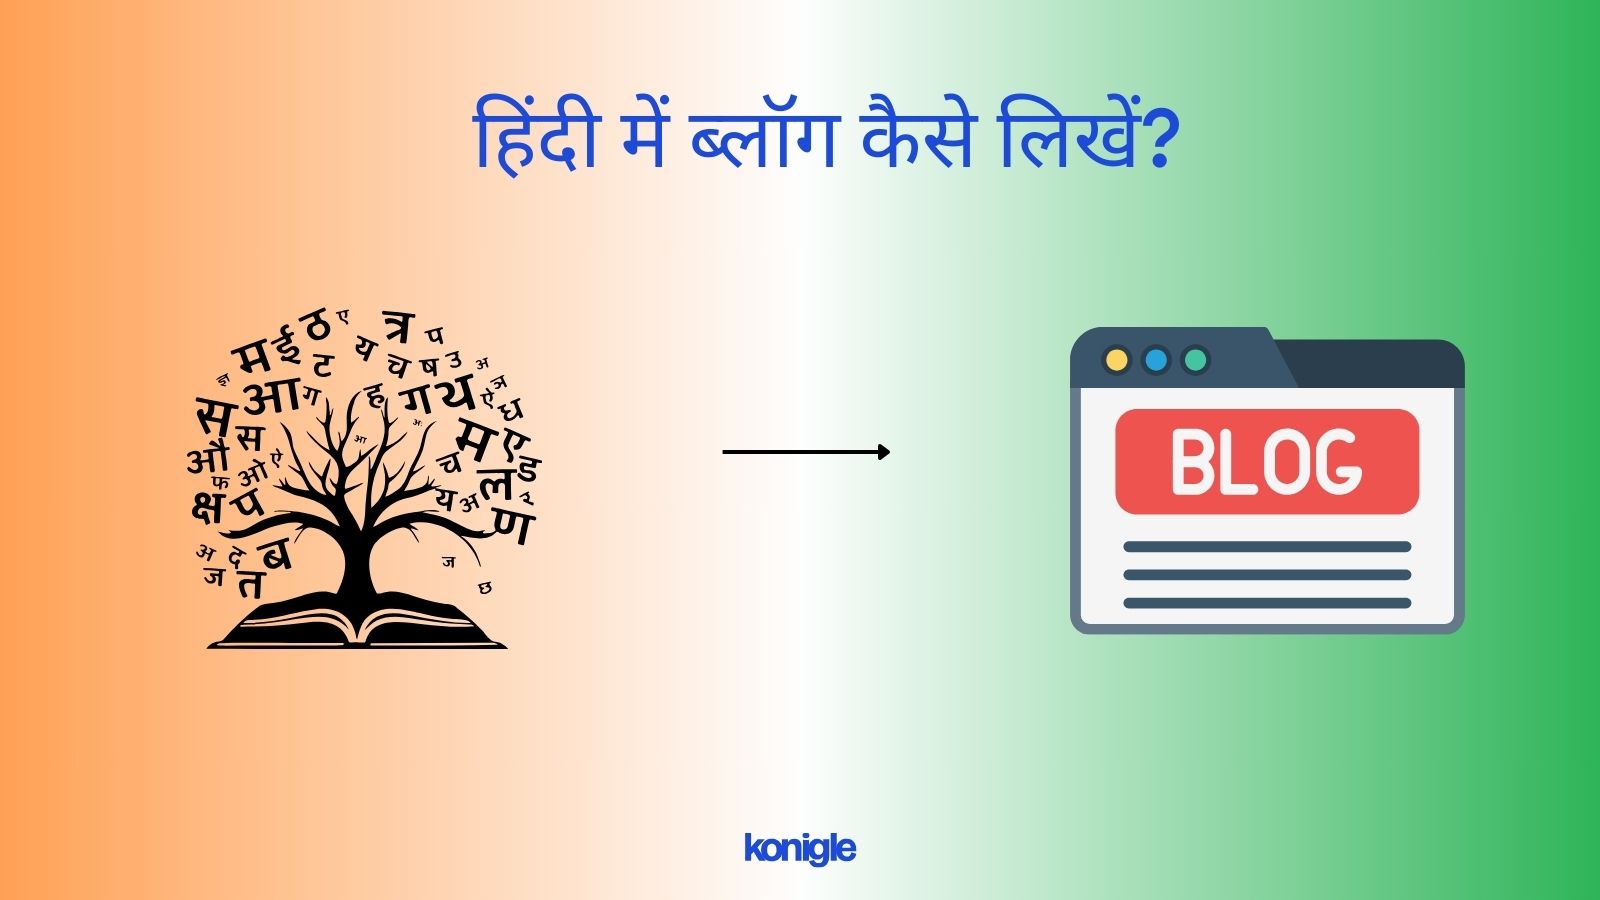 How to write blog in hindi